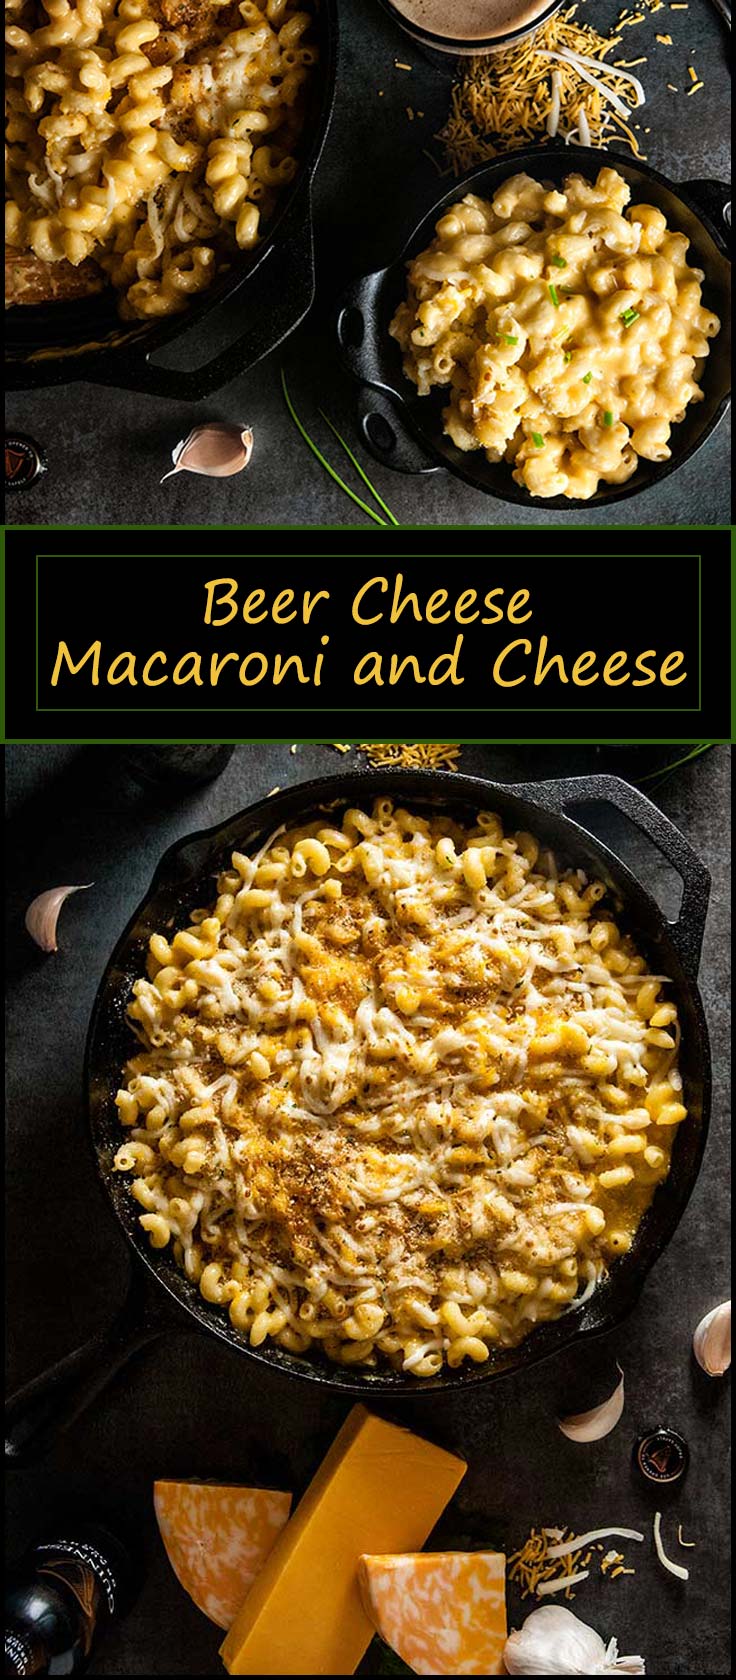 This Beer Cheese Macaroni and Cheese with Guinness beer cheese recipe makes a quick comforting dinner for St. Patrick's Day from www.seasonedsprinkles.com